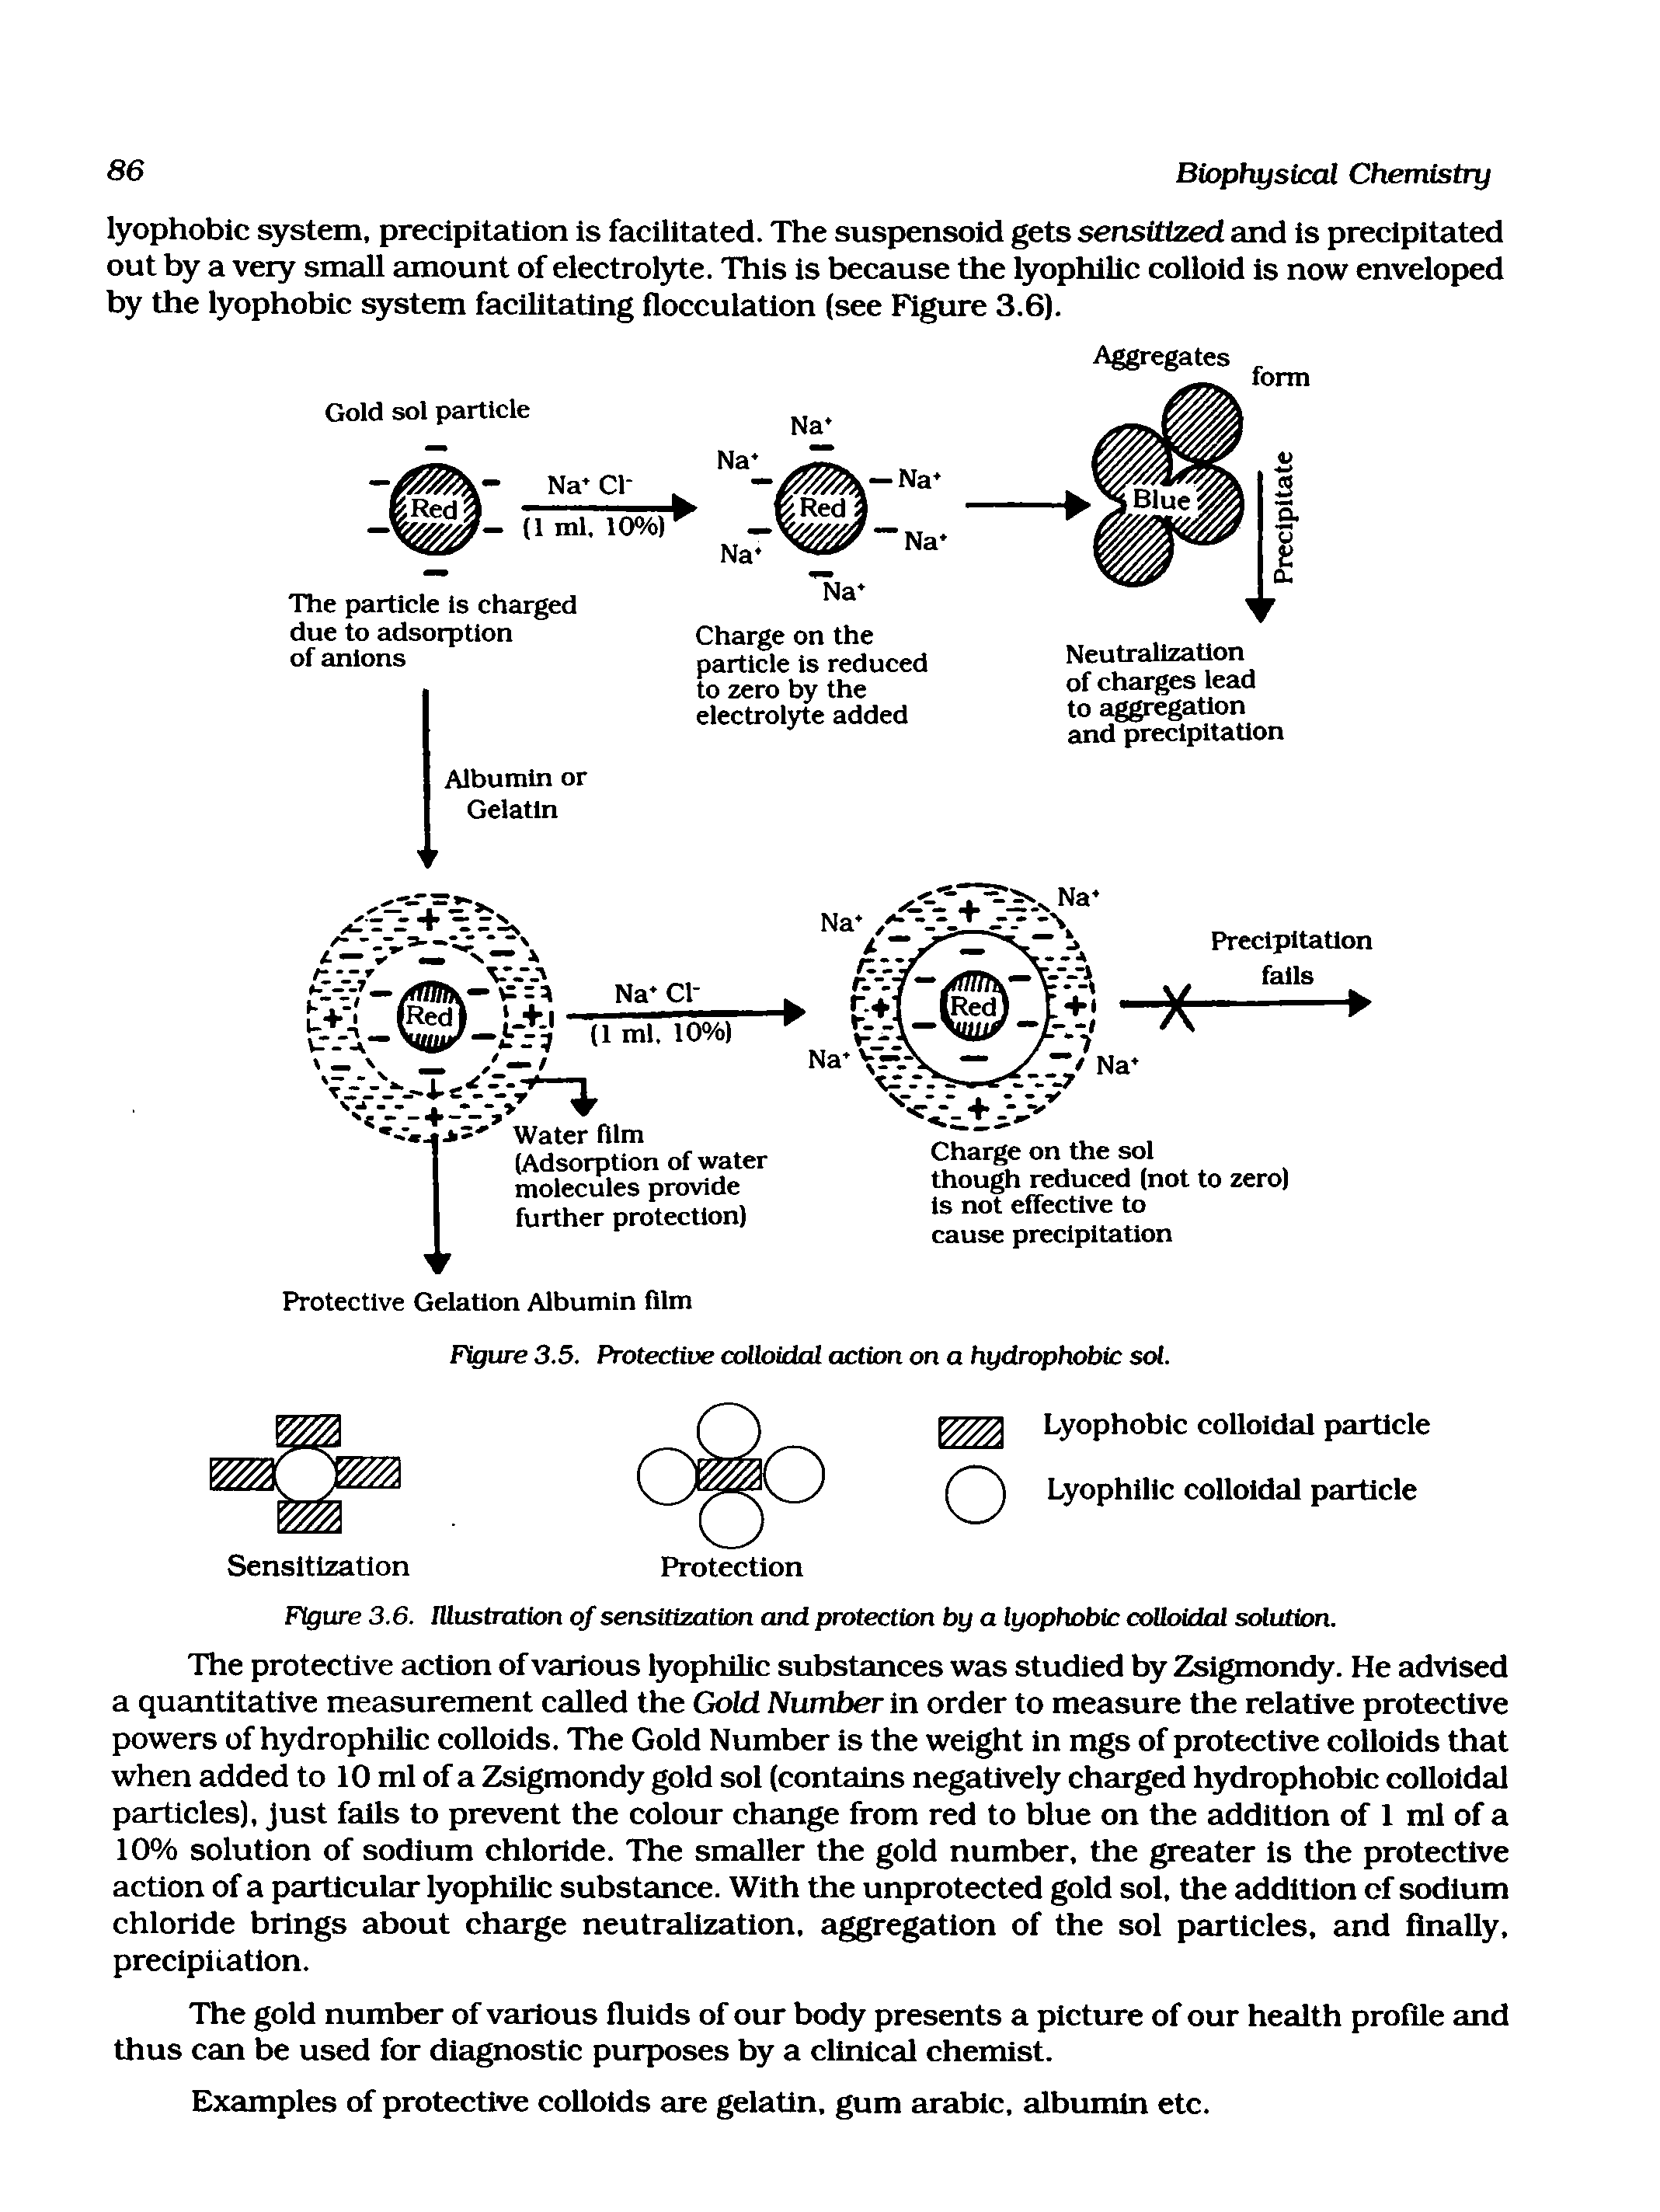 Figure 3.6. Illustration of sensitization and protection by a lyophobic colloidal solution.